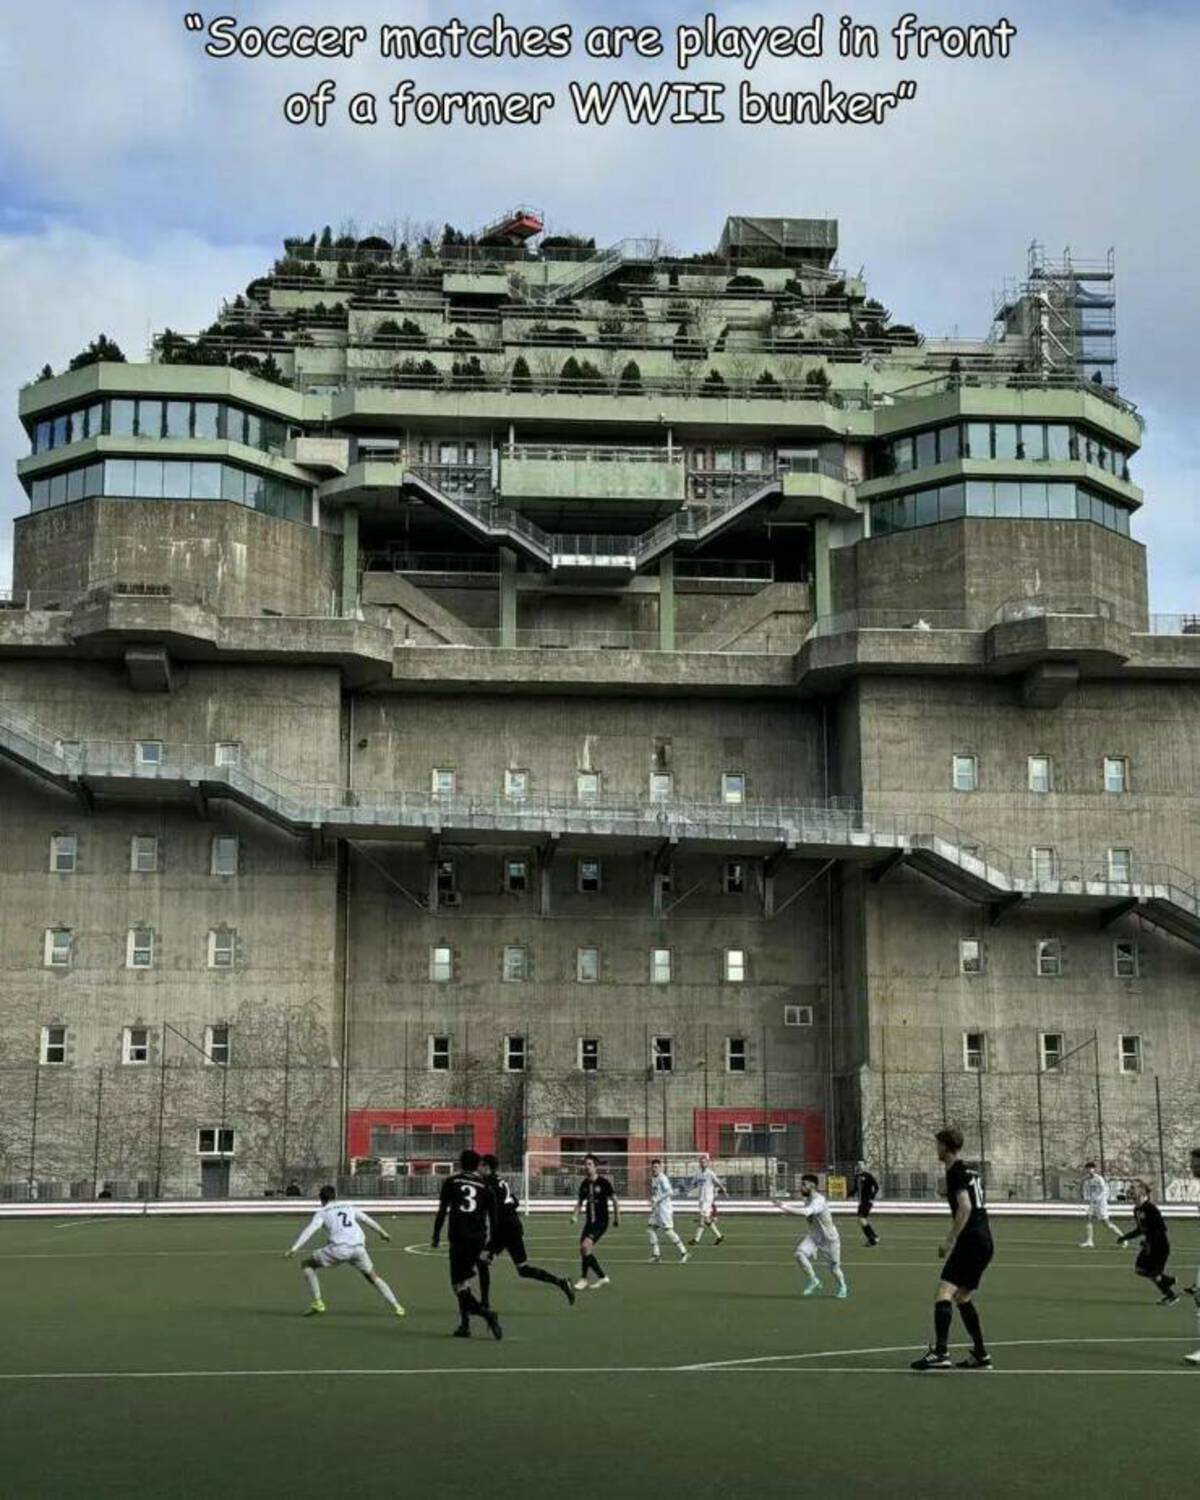 palace - "Soccer matches are played in front of a former Wwii bunker" 3